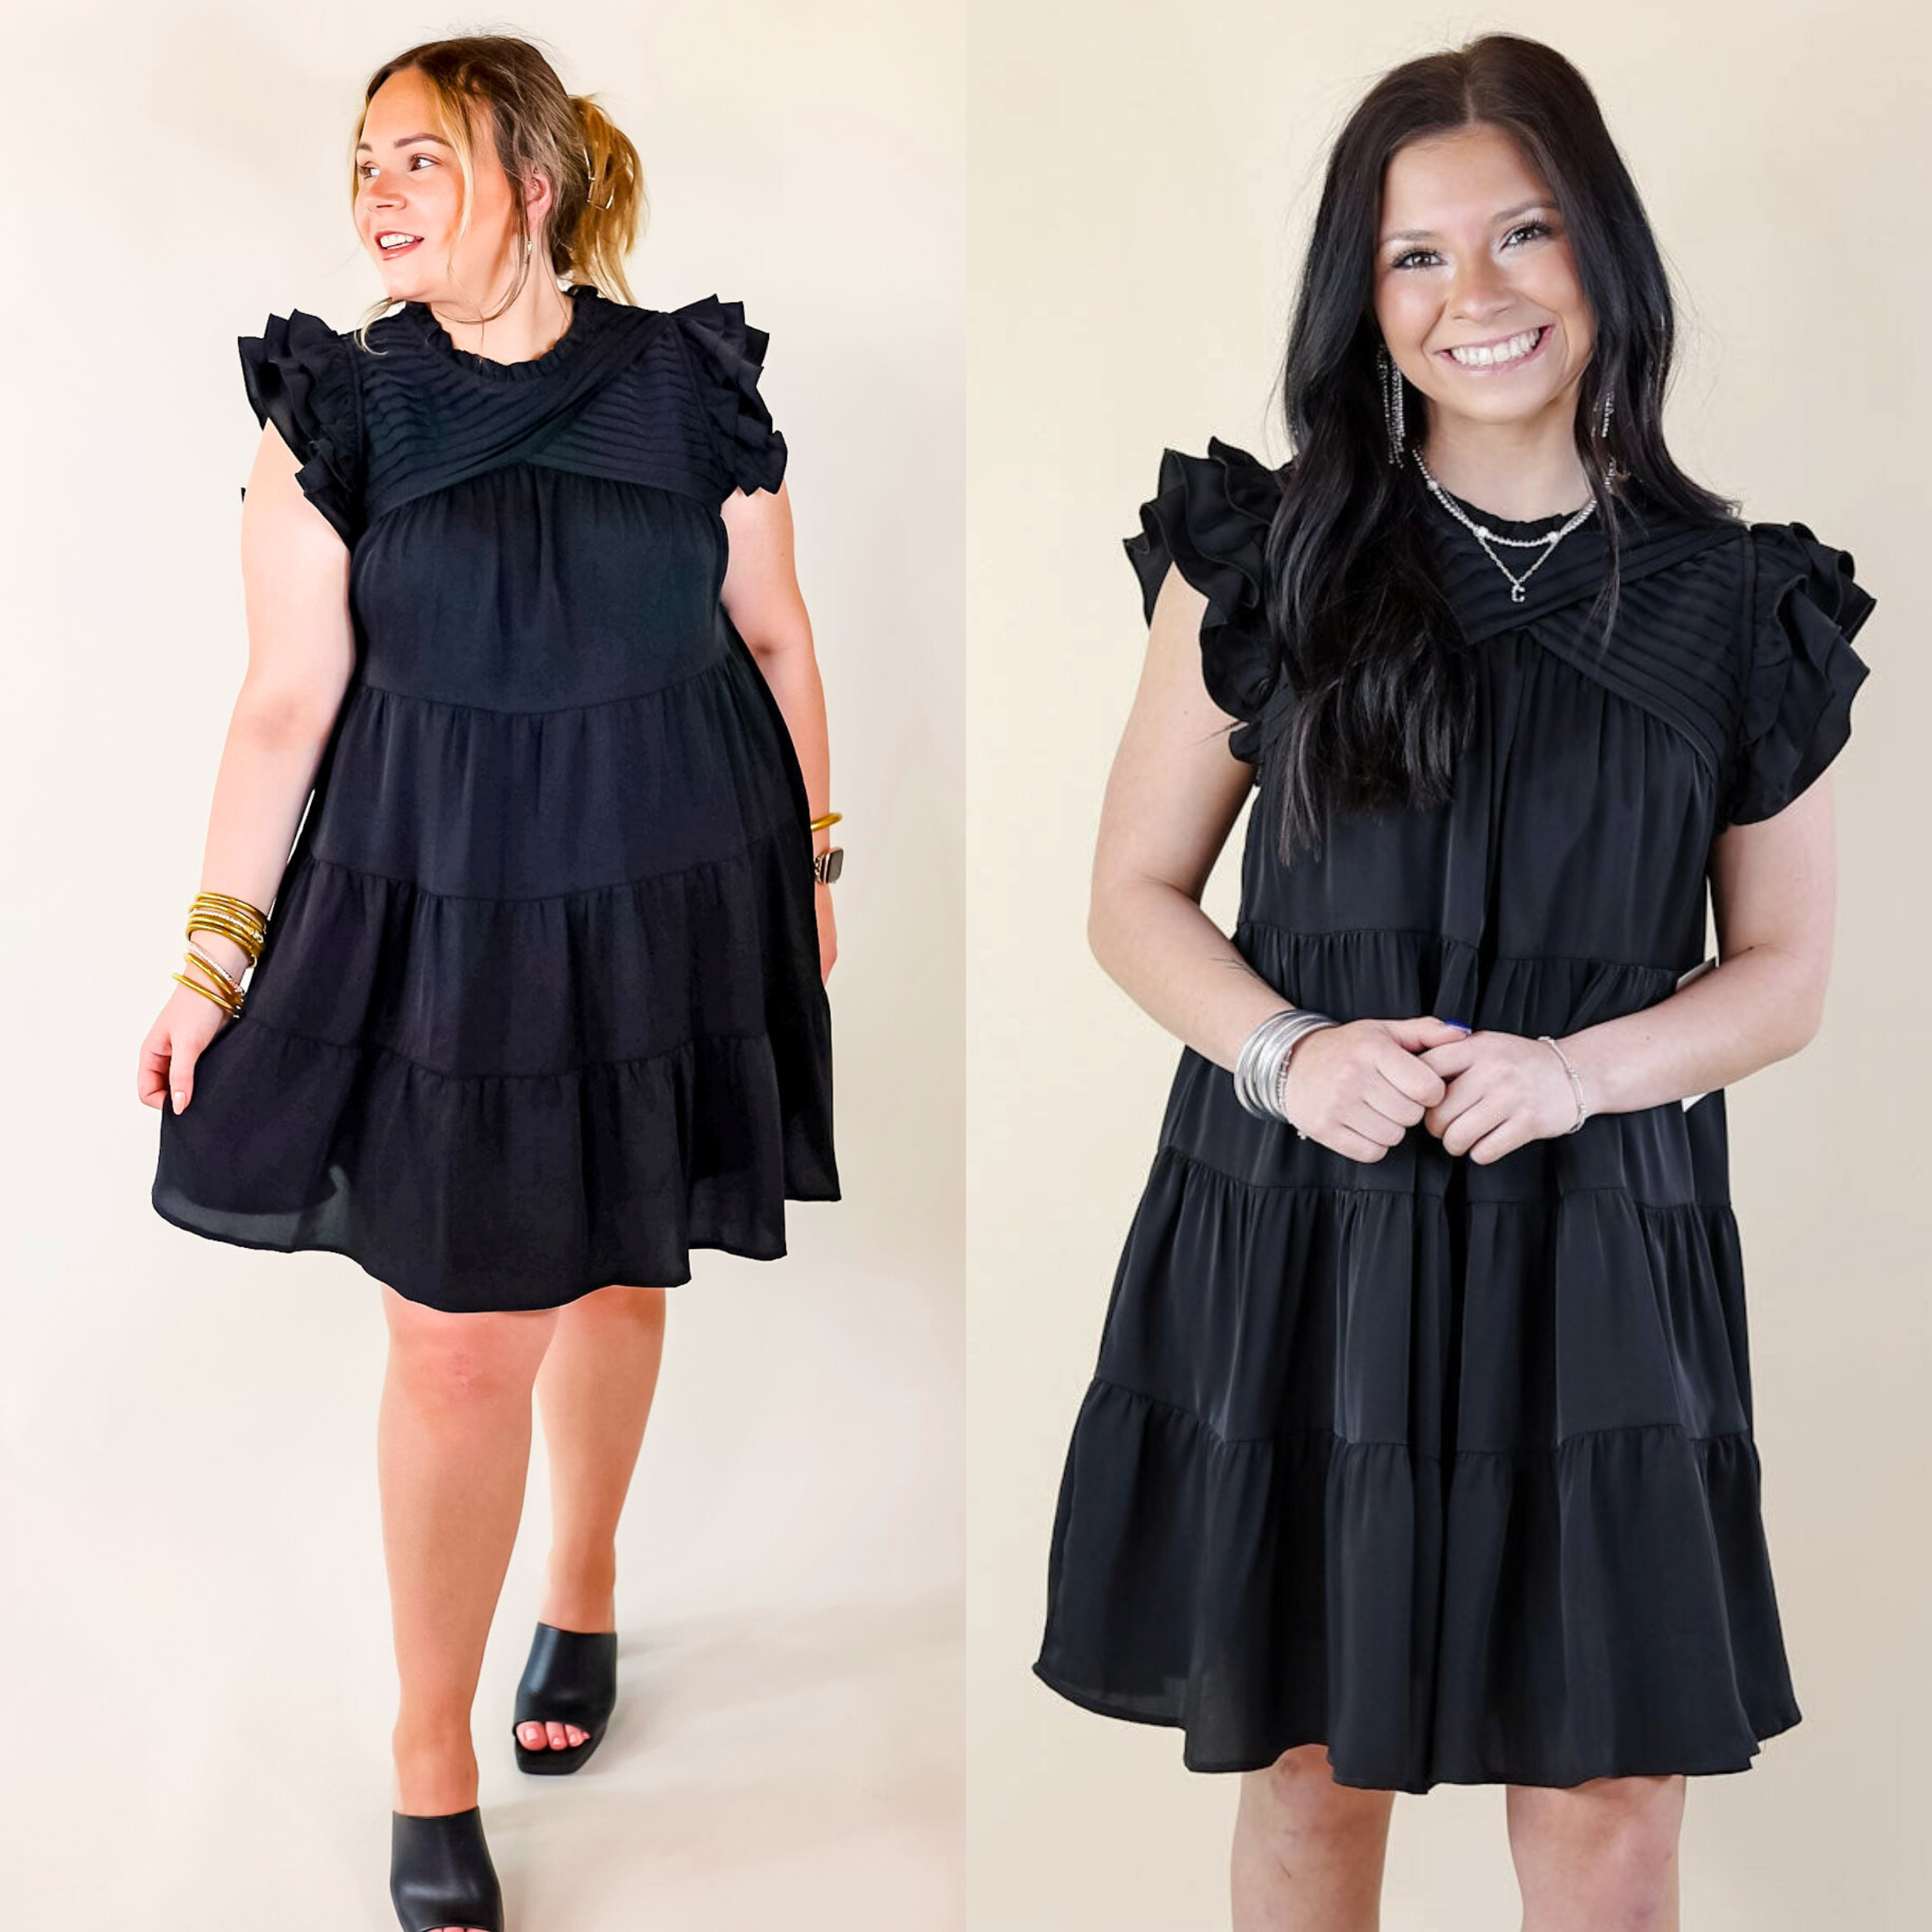 Chic On Scene Ruffle Tiered Dress with Pleated Detailing in Black - Giddy Up Glamour Boutique